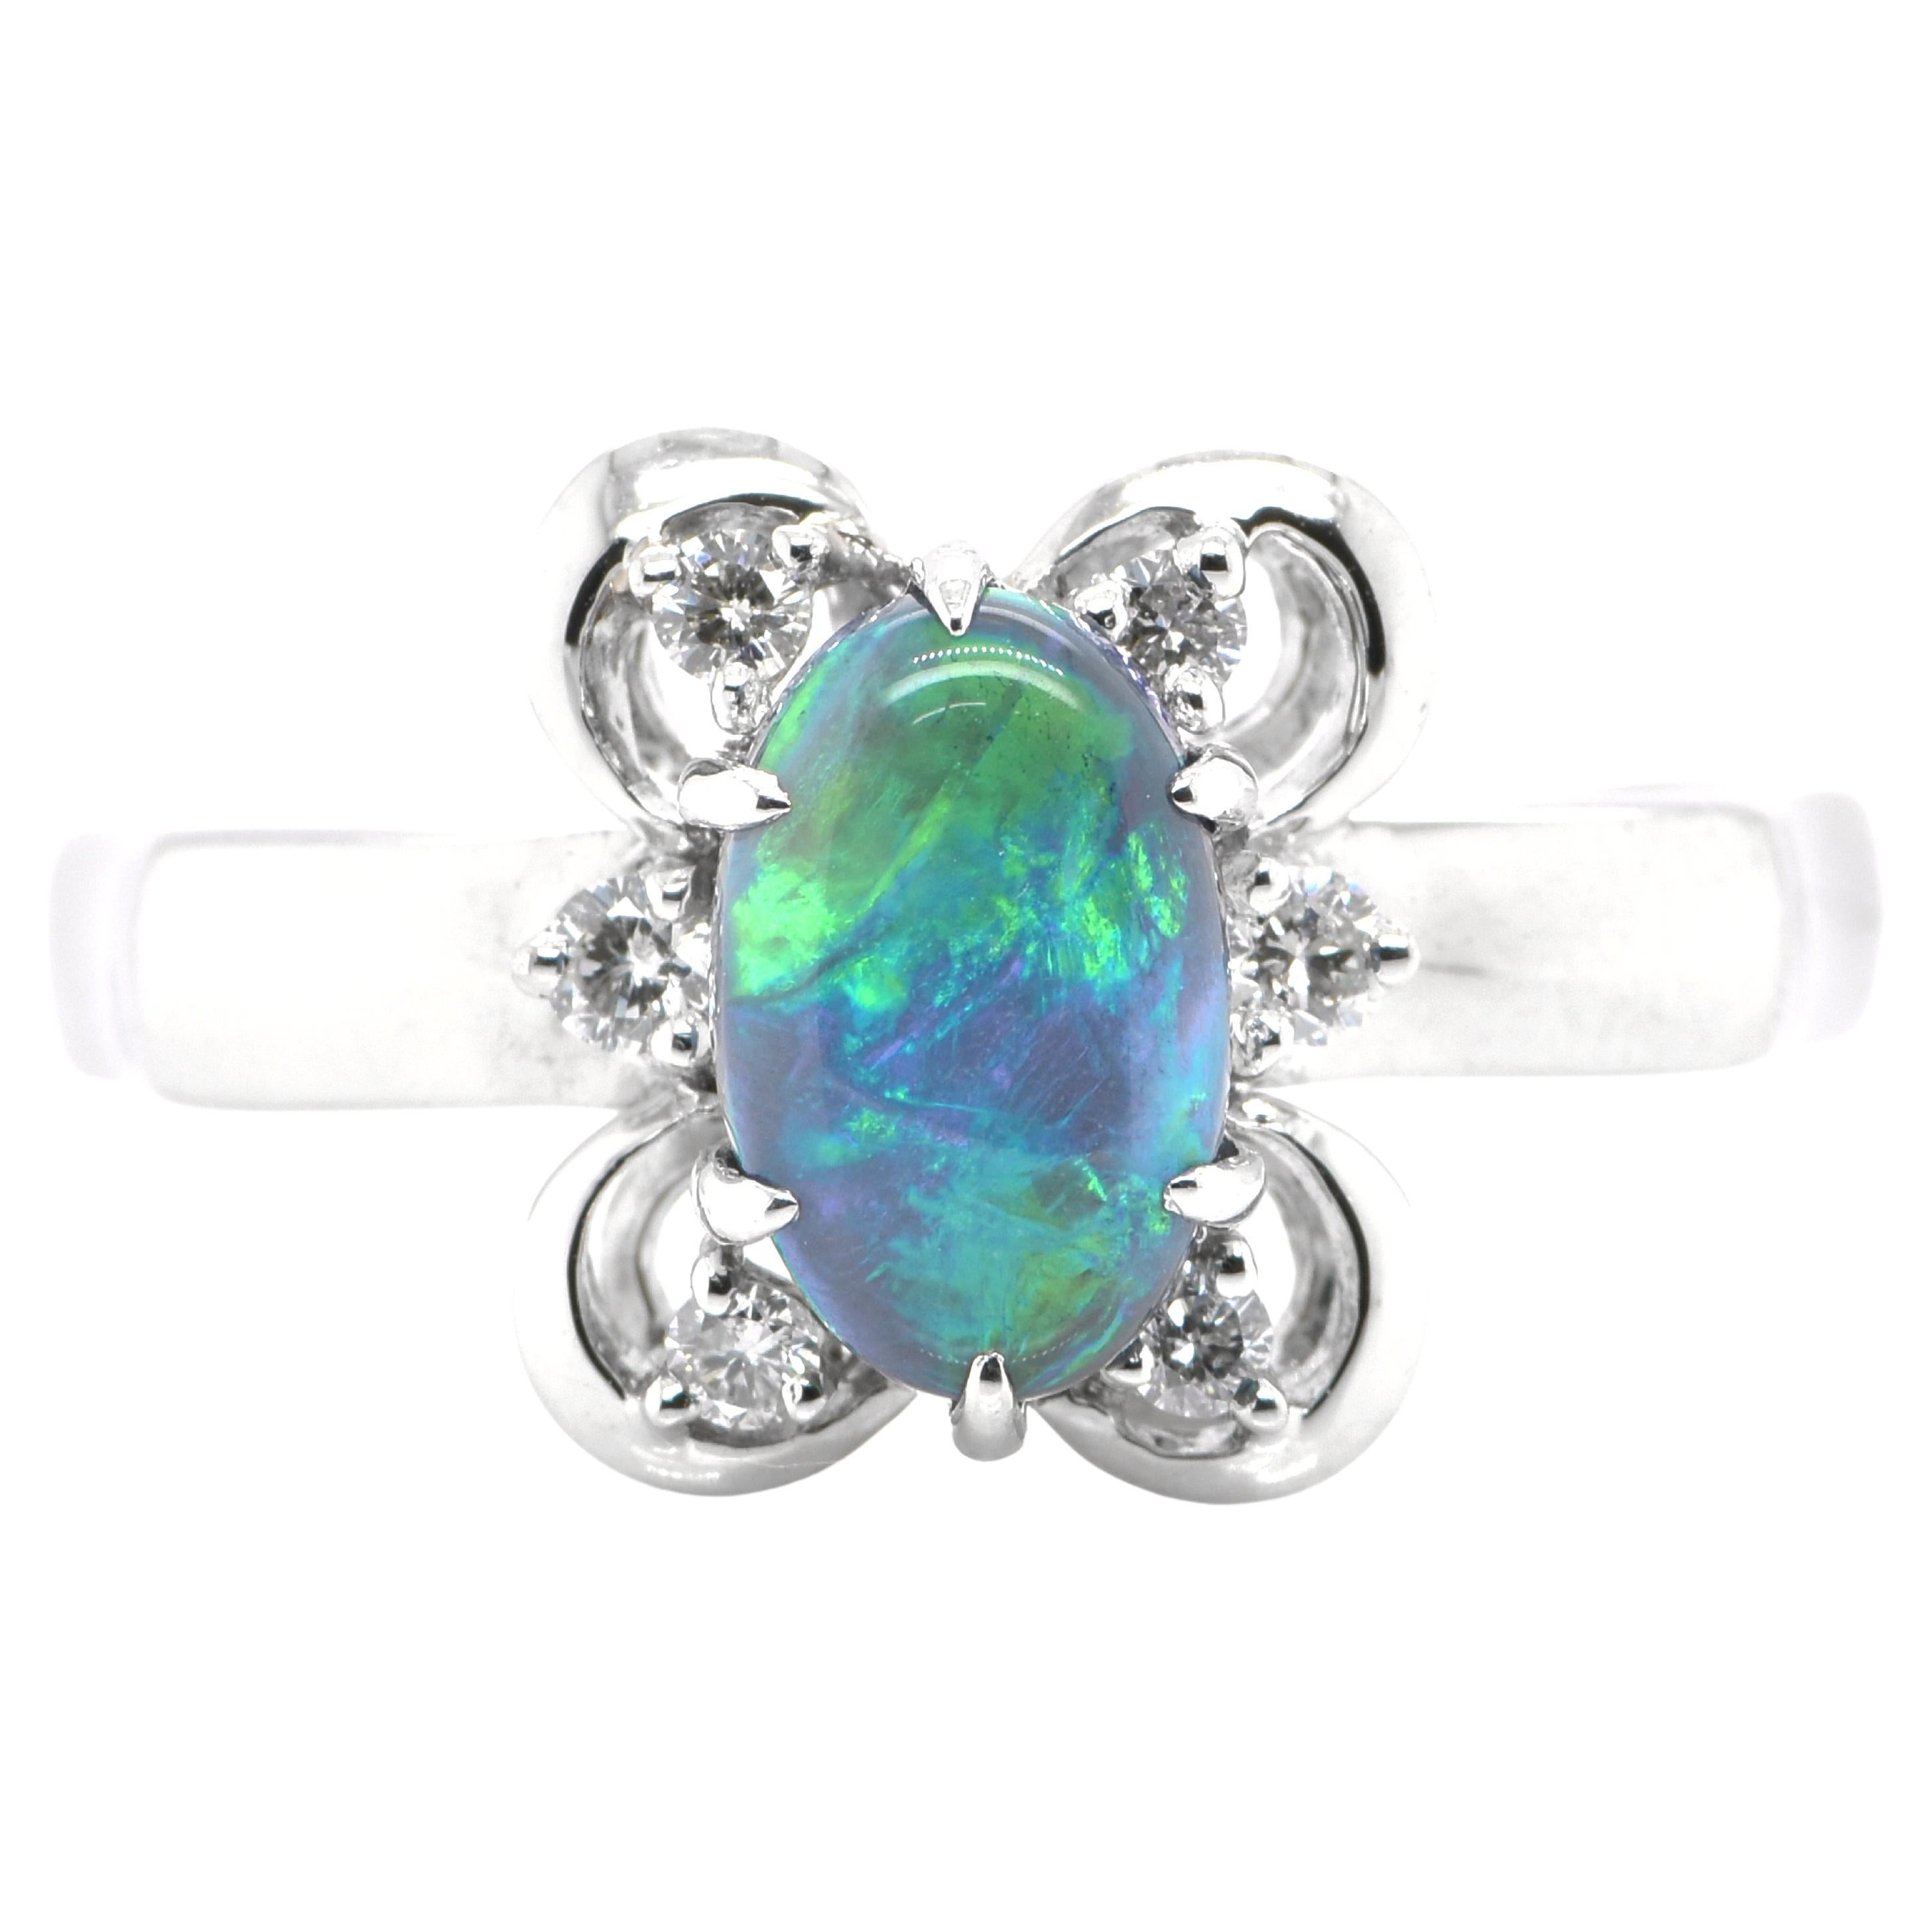 1.43 Carat Natural Black Opal & Diamond Butterfly Cocktail Ring Set in Platinum